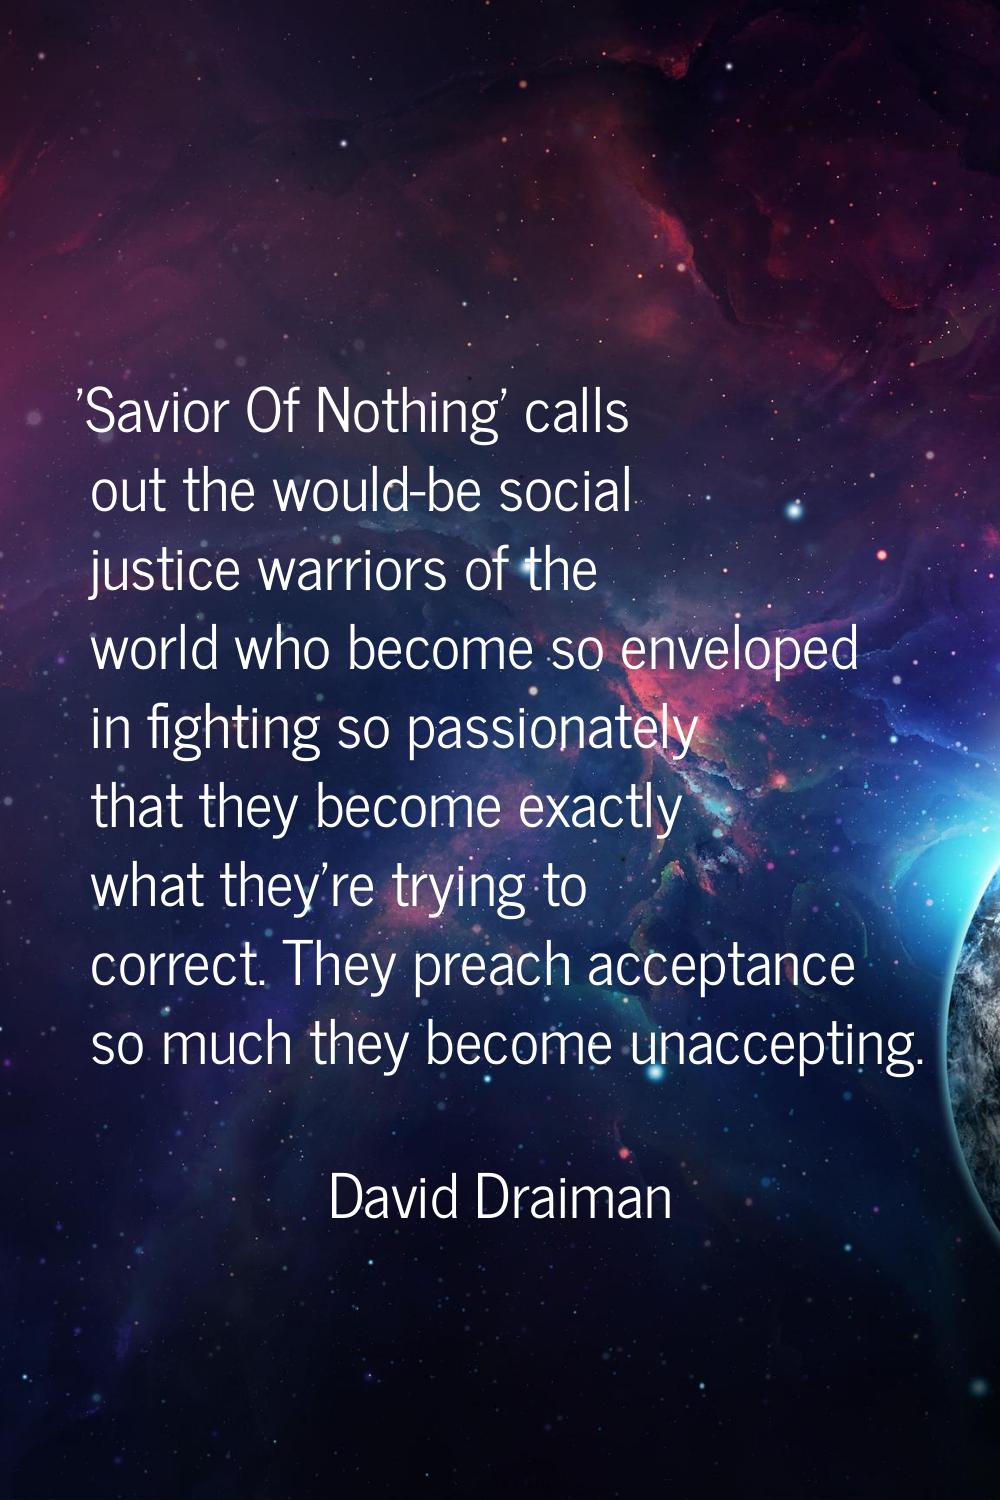 'Savior Of Nothing' calls out the would-be social justice warriors of the world who become so envel